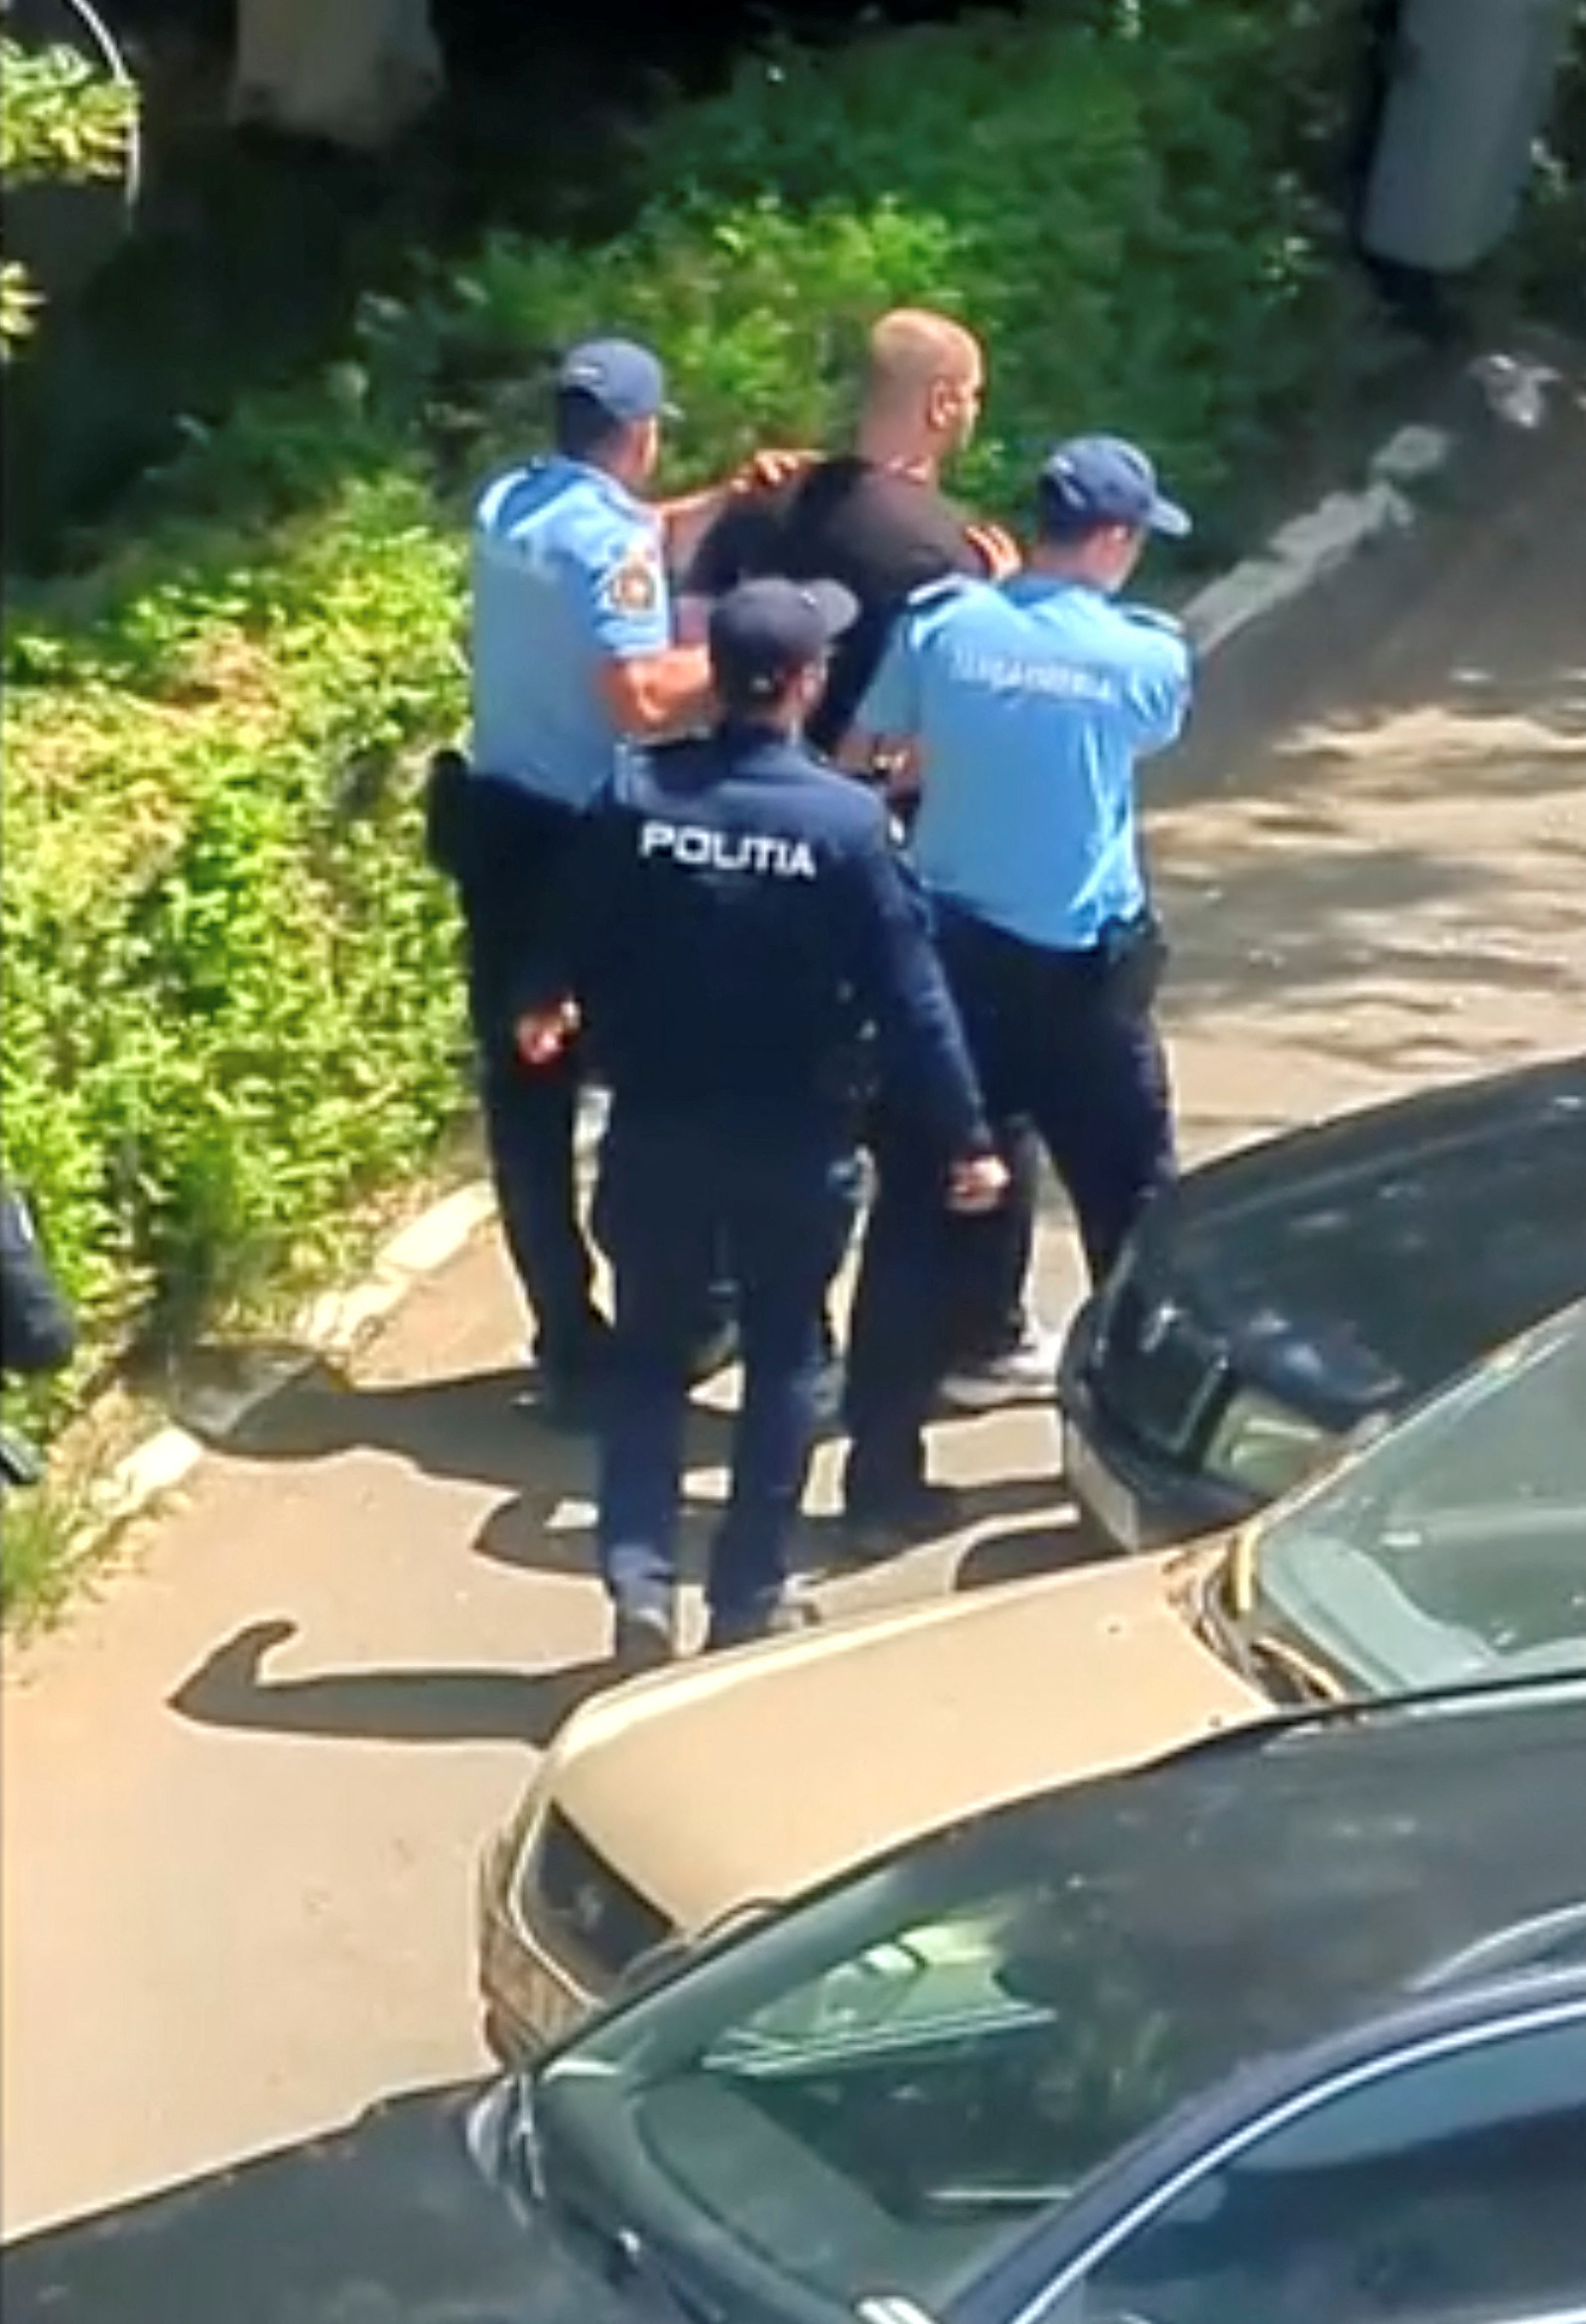 Romanian police escort suspect in Bucharest after Molotov cocktail was thrown at Israeli embassy